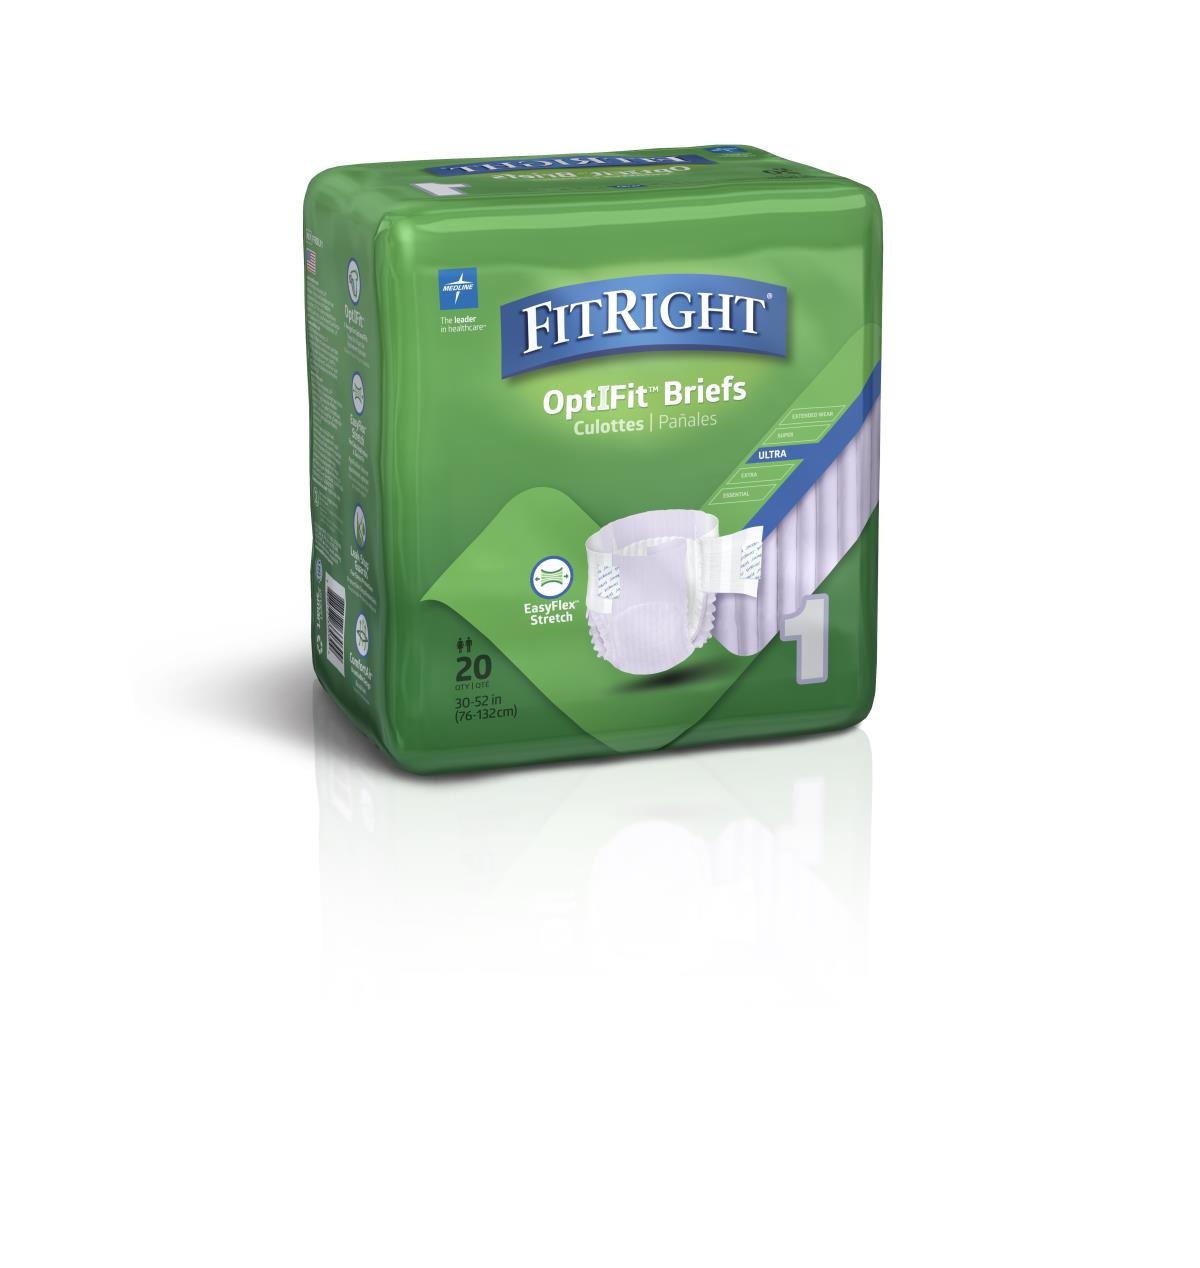 FitRight OptiFit Ultra Incontinence Briefs with Center Tab Adult